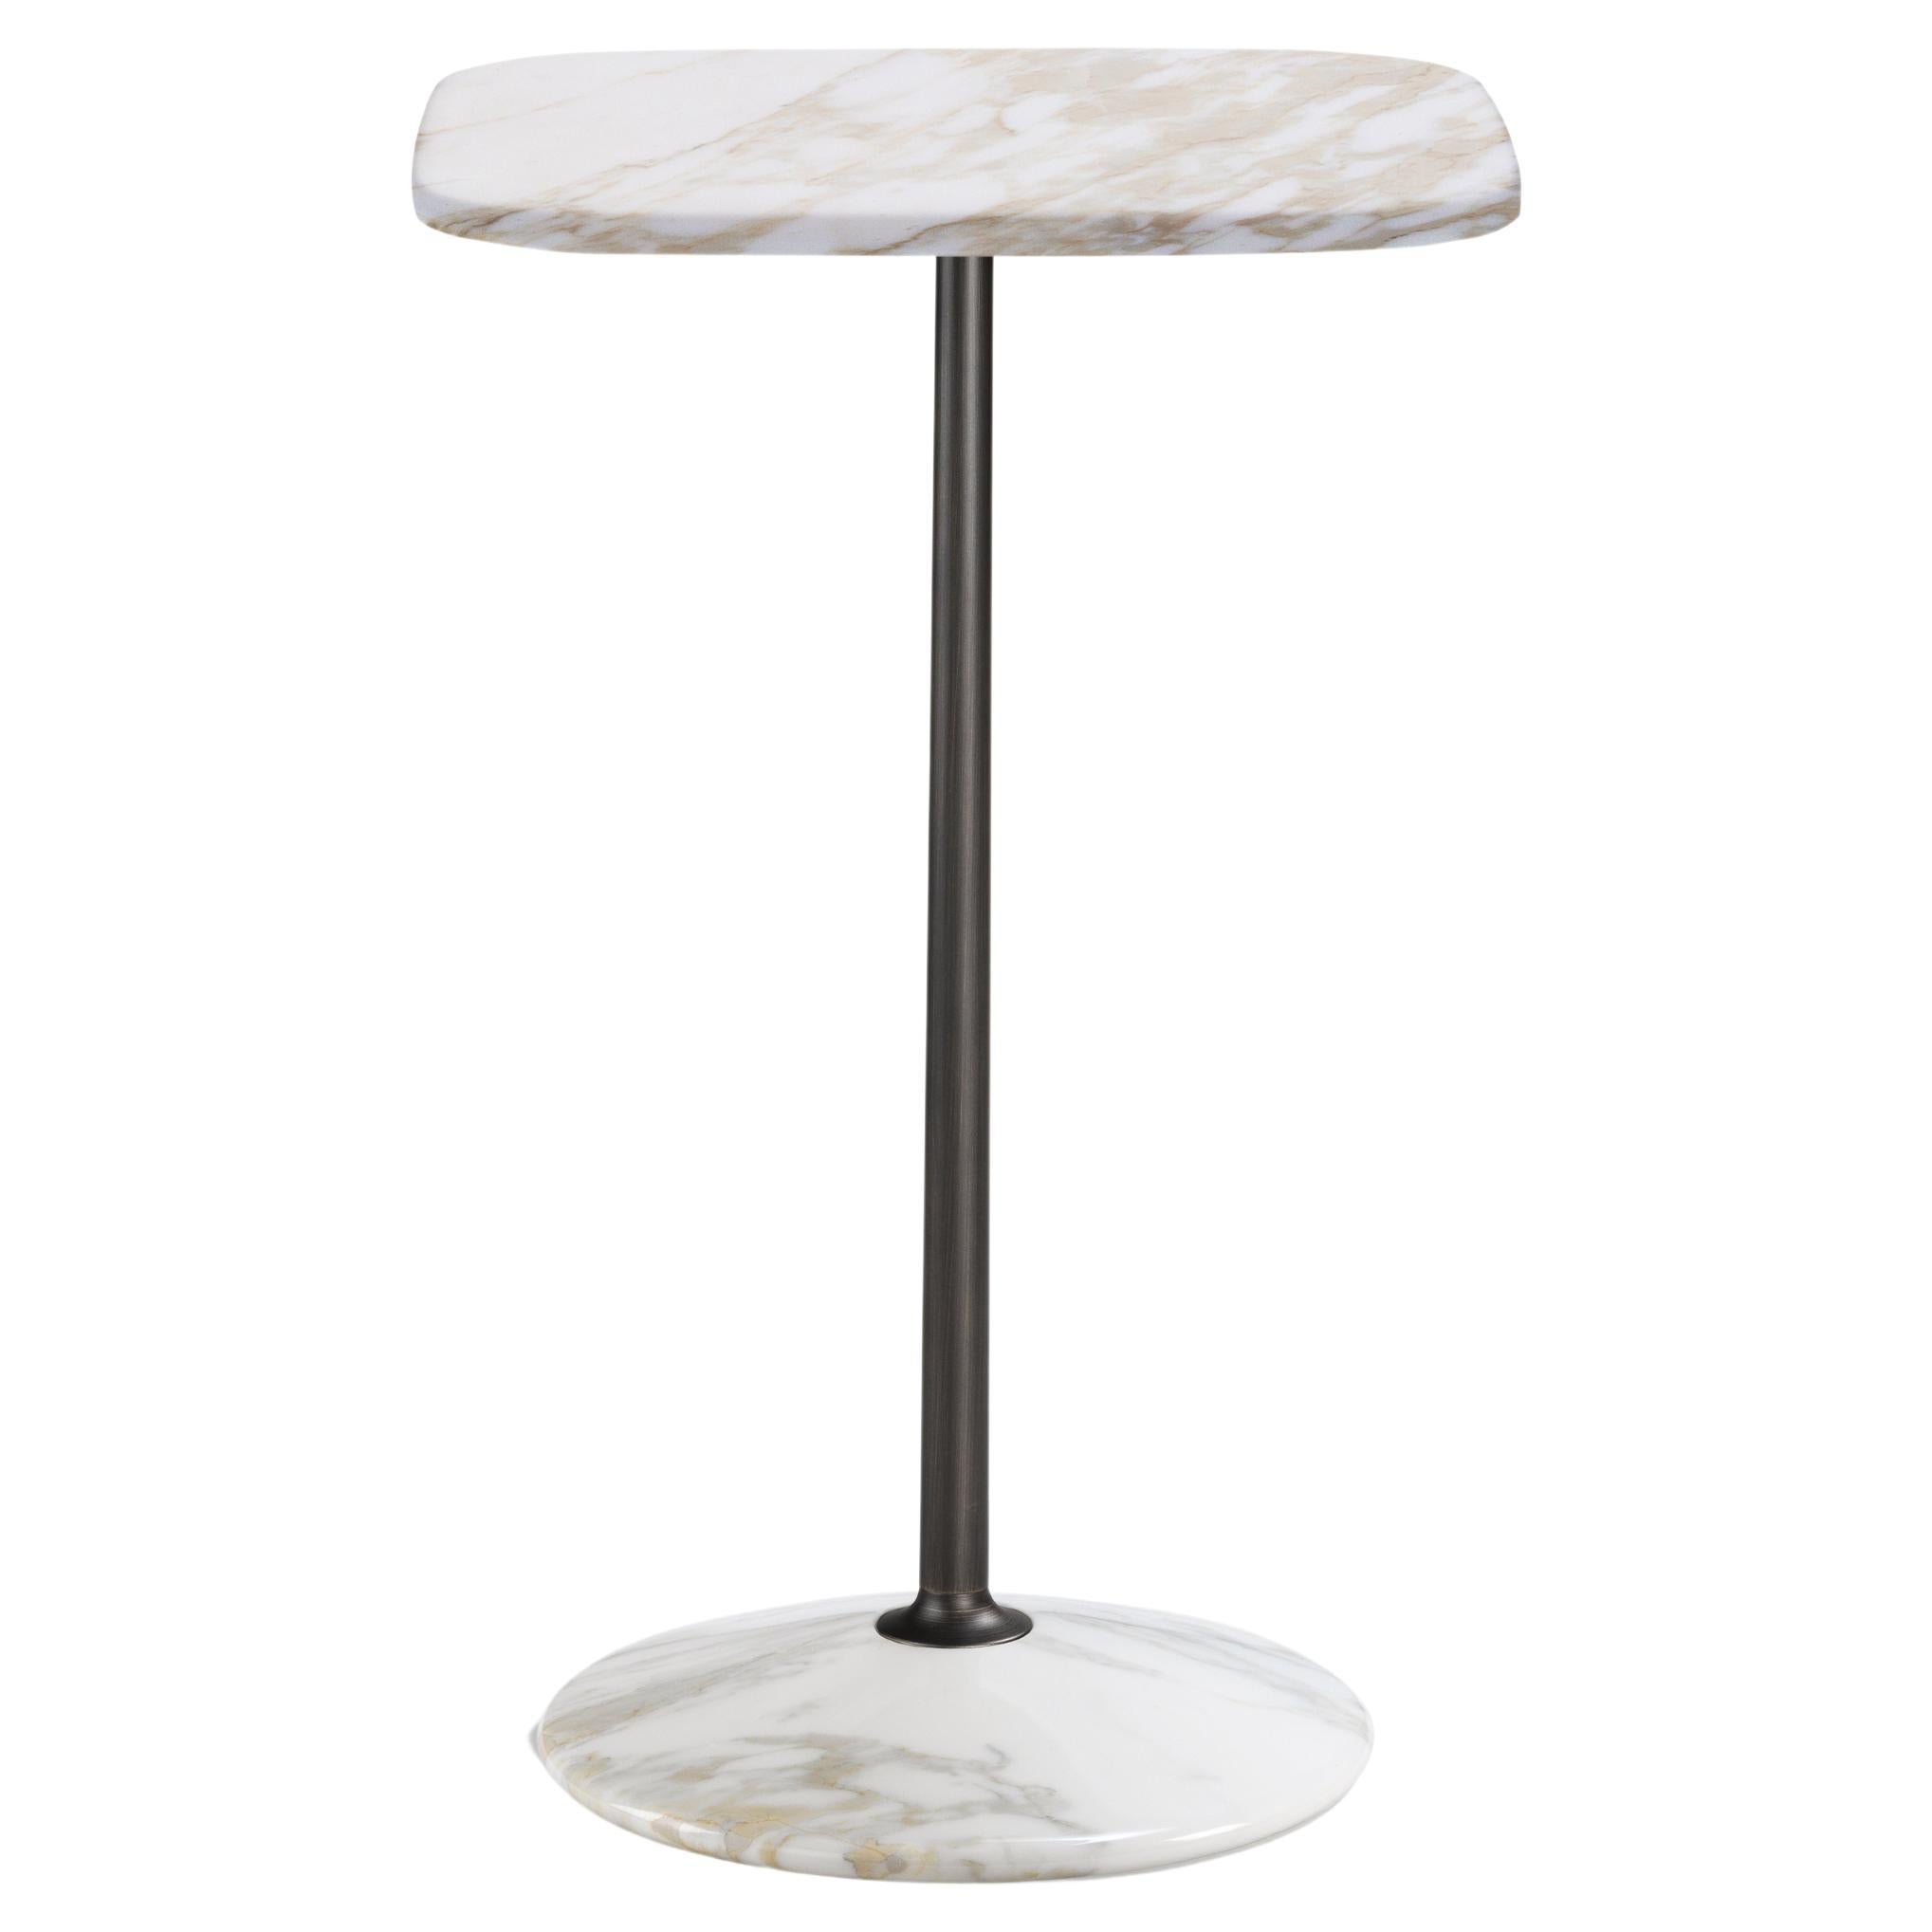 Arnold Tall Table, Calacatta Gold Top, Burnished Brass Structure, Made in Italy